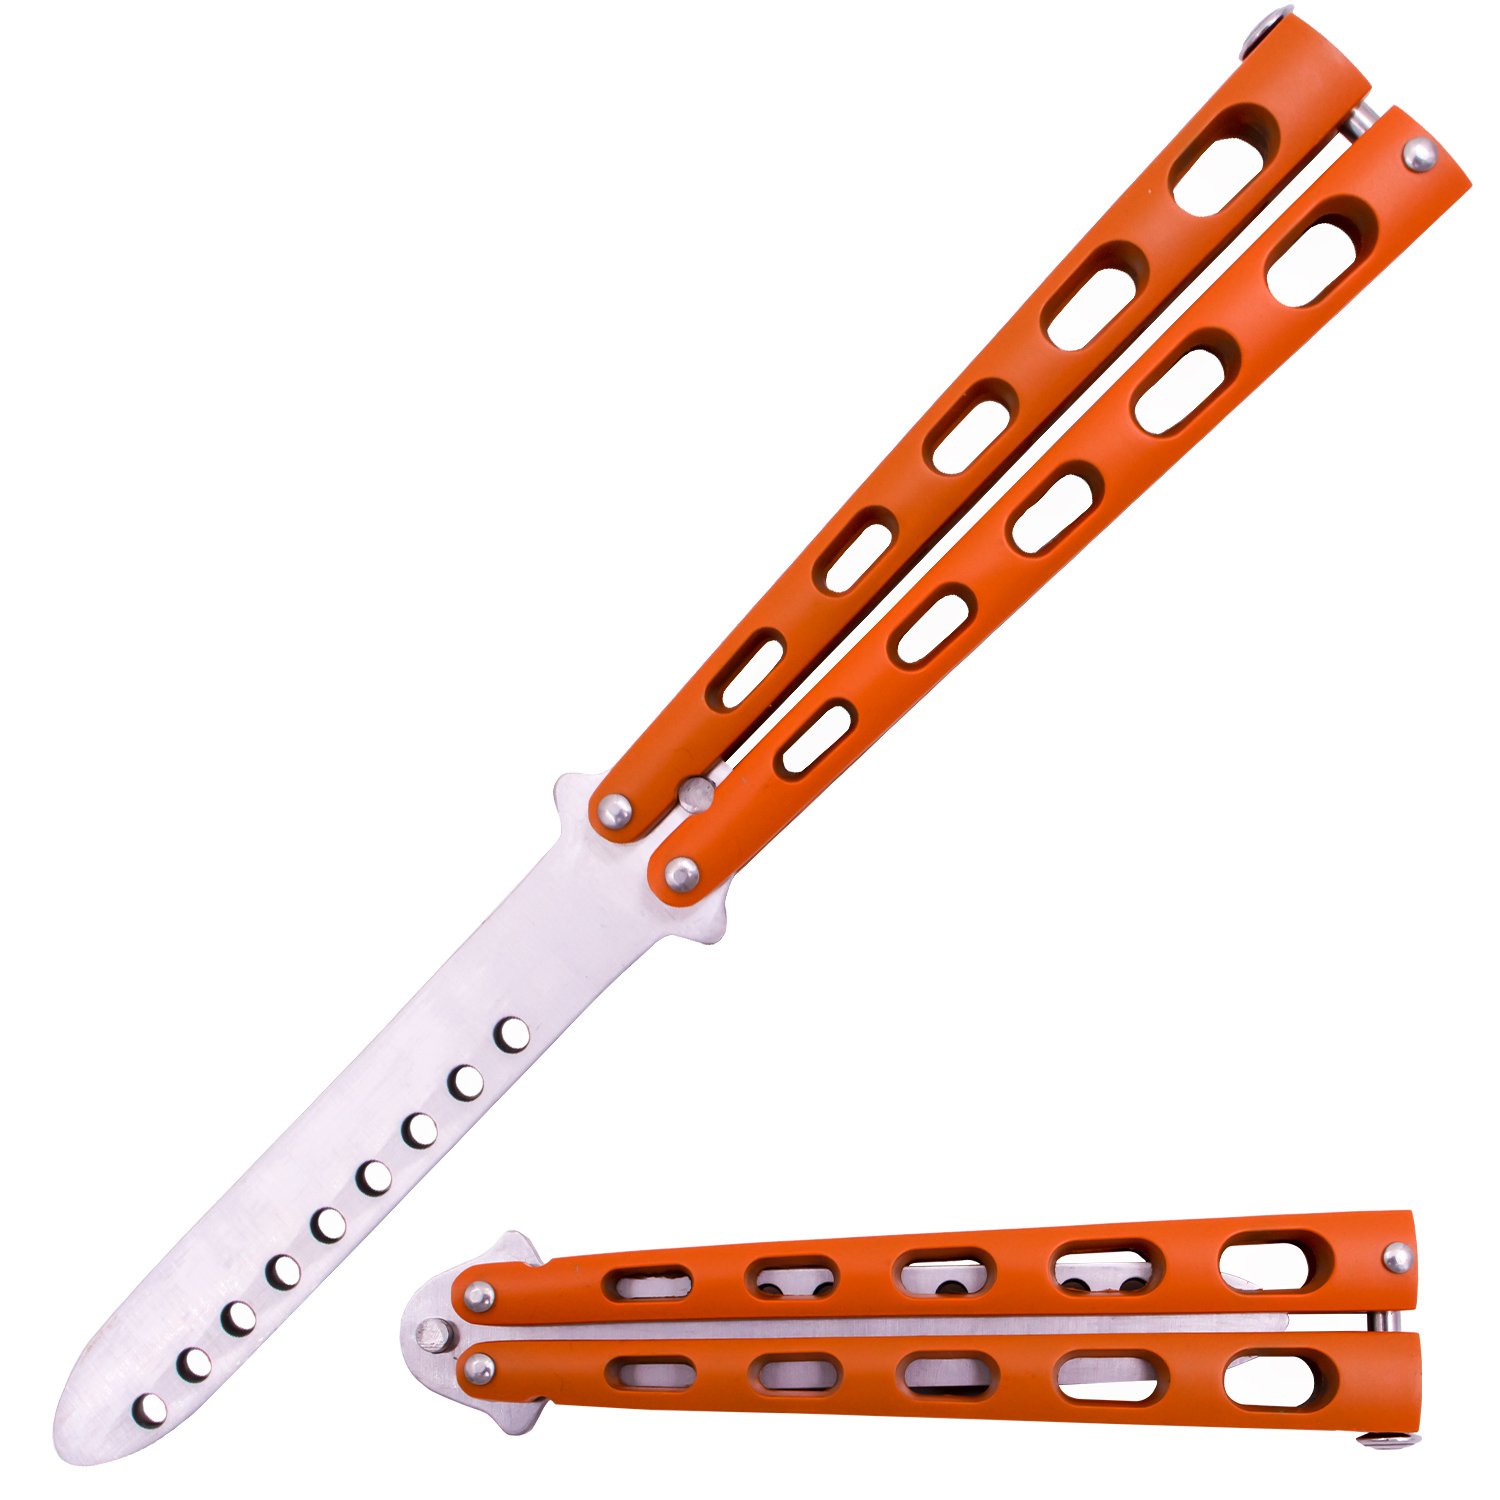 Tiger USA Butterfly Training Knife 440 Stainless 8.85 Inch   Orange